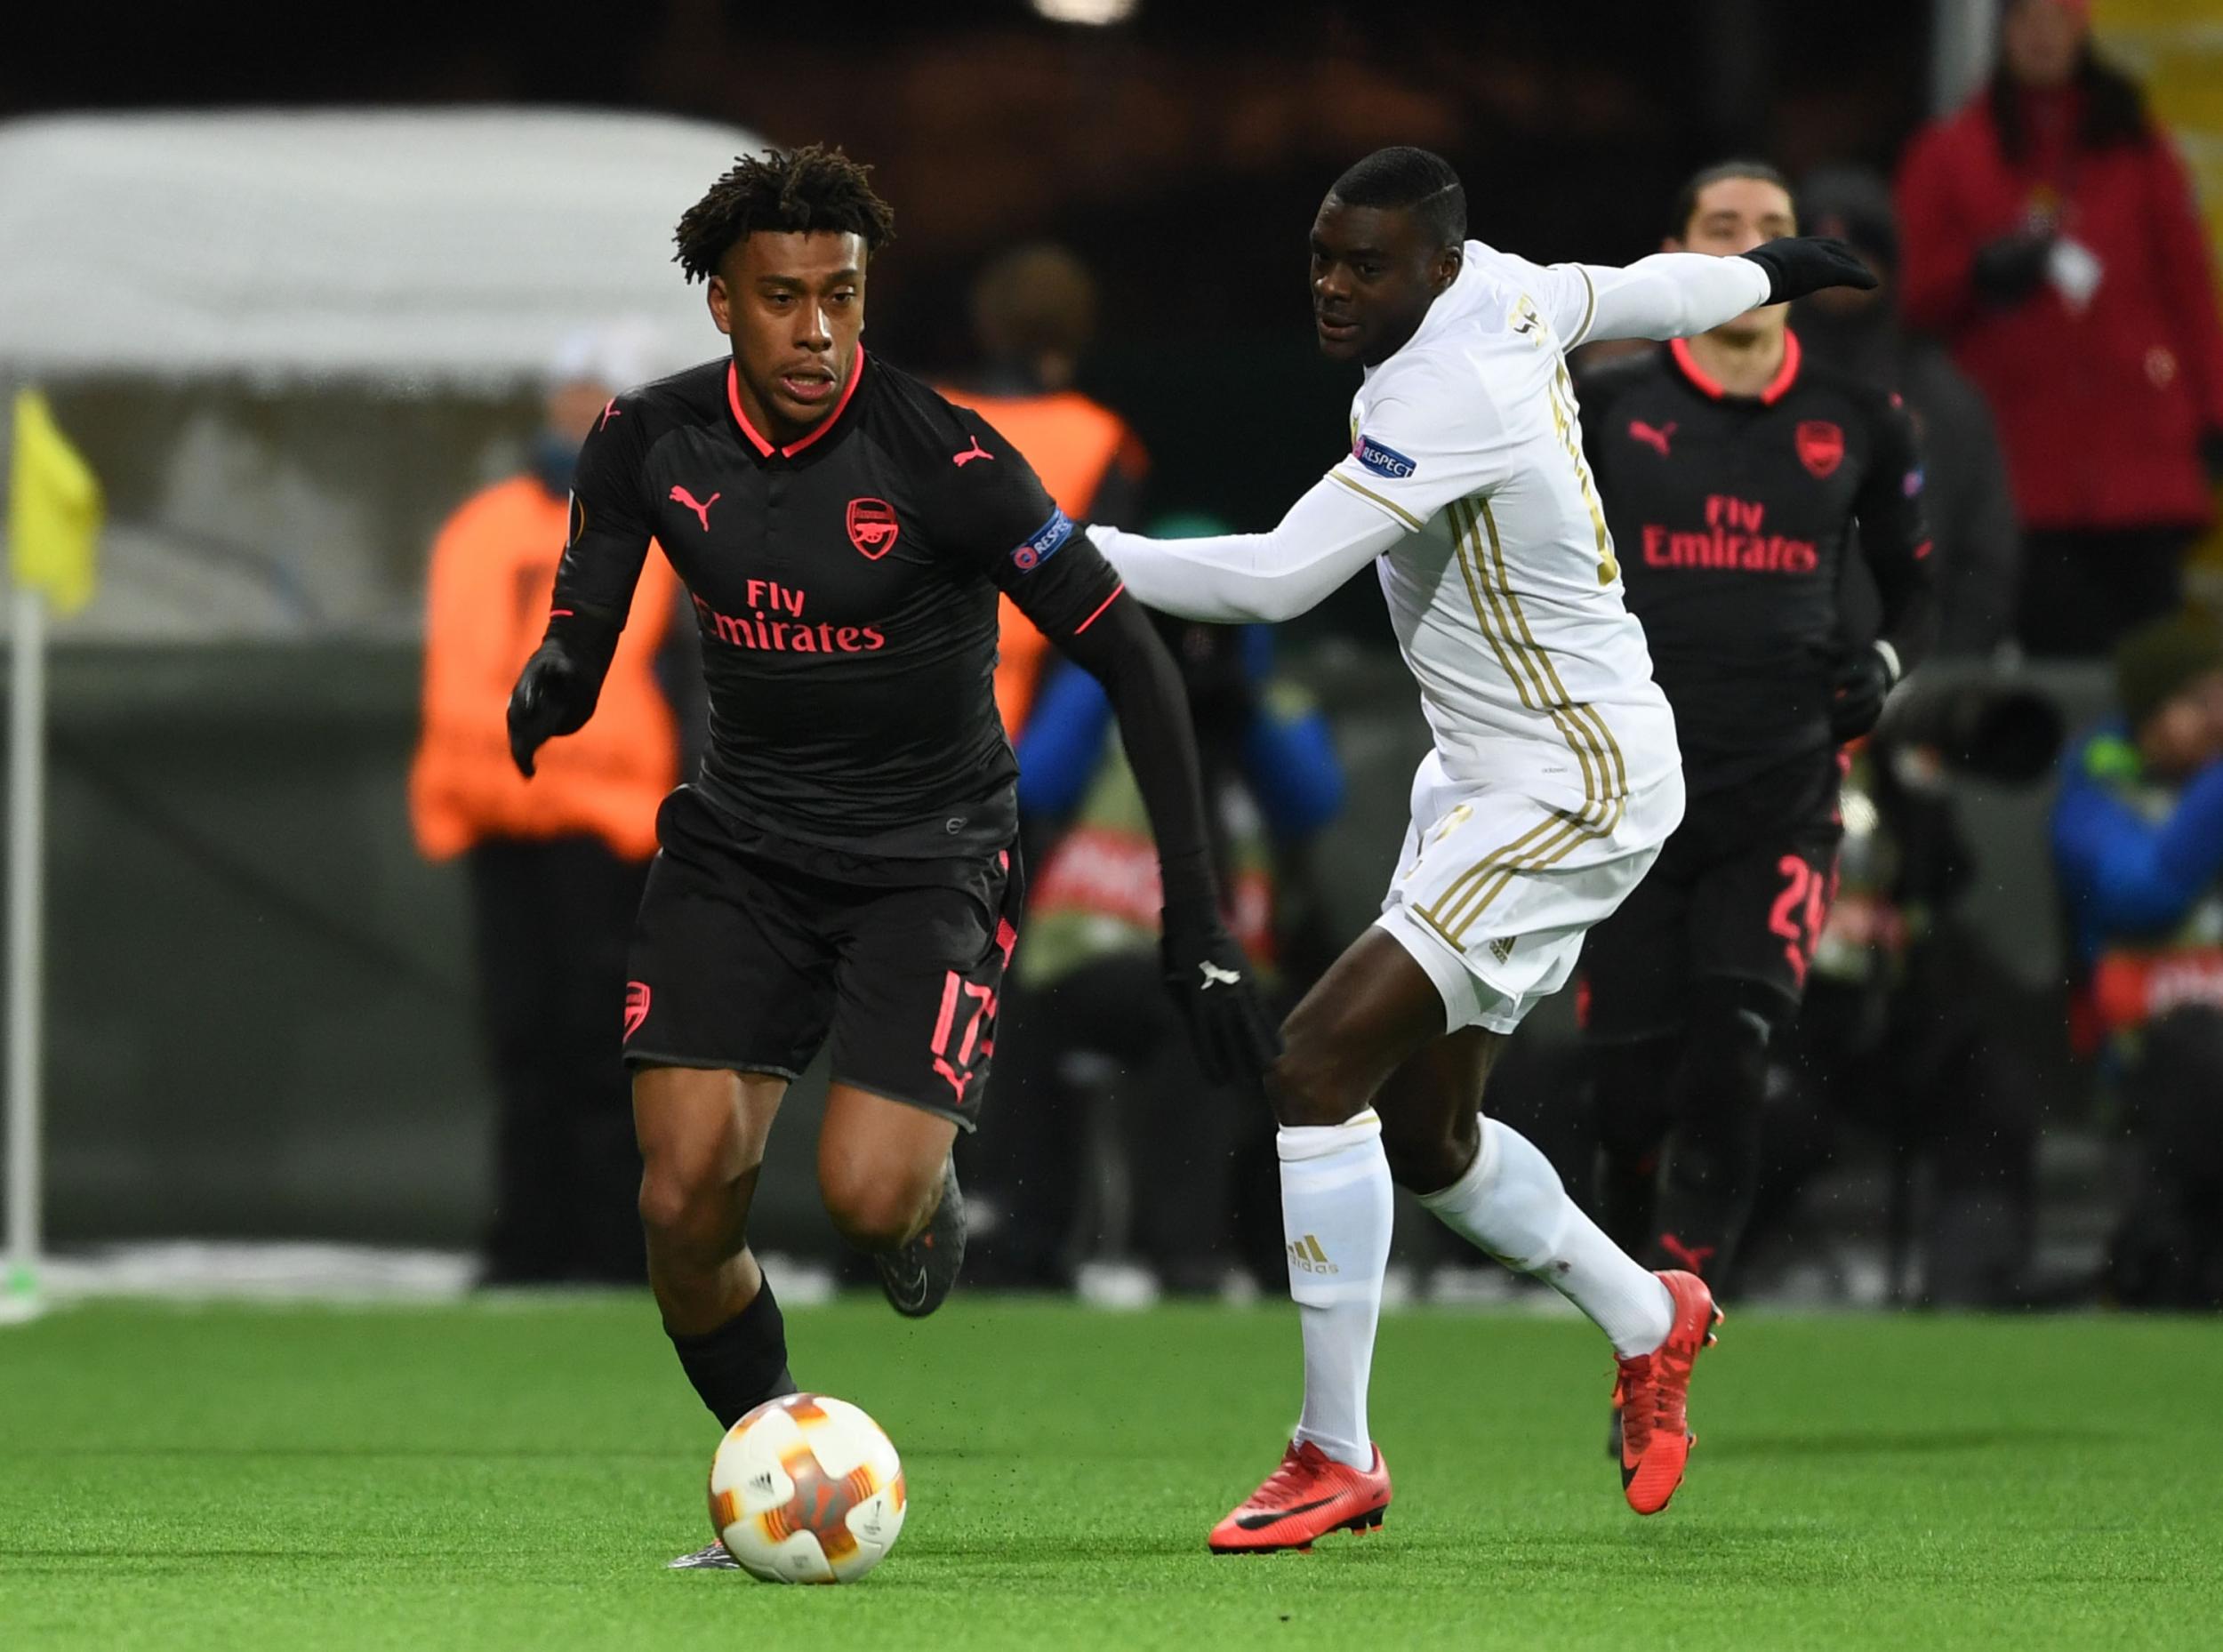 Alex Iwobi is likely to get plenty more opportunities in Europe